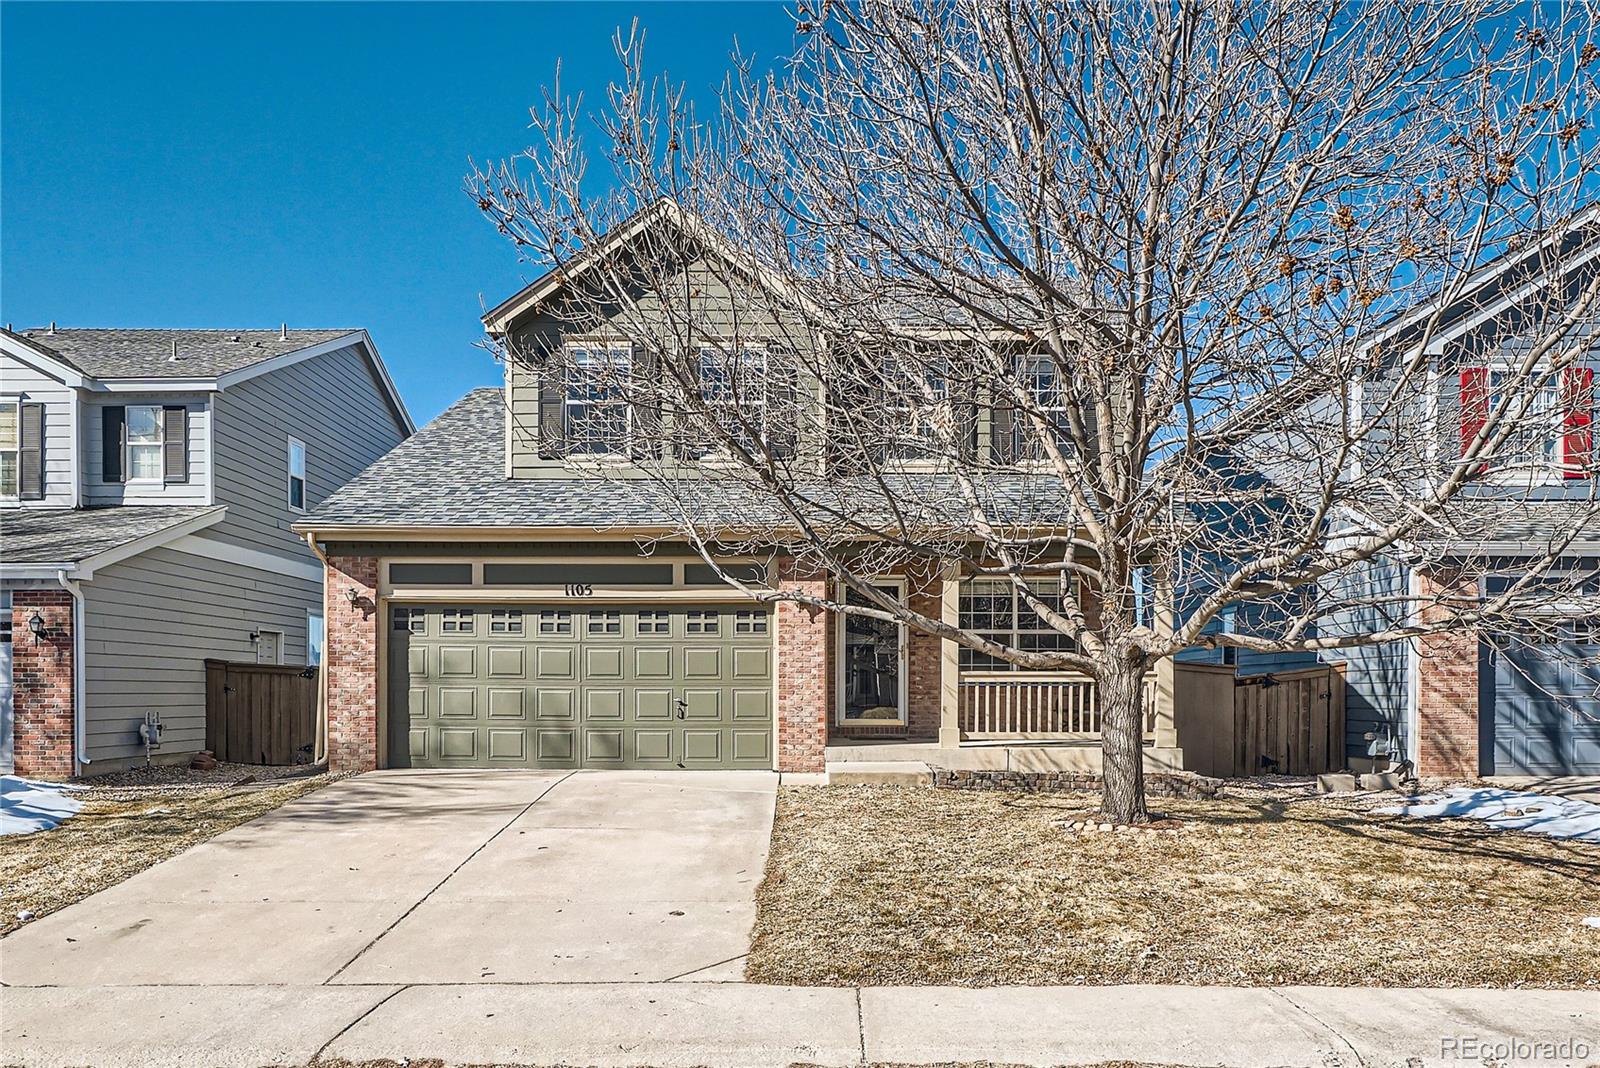 1105  Mulberry Lane, highlands ranch MLS: 3651298 Beds: 3 Baths: 3 Price: $655,000